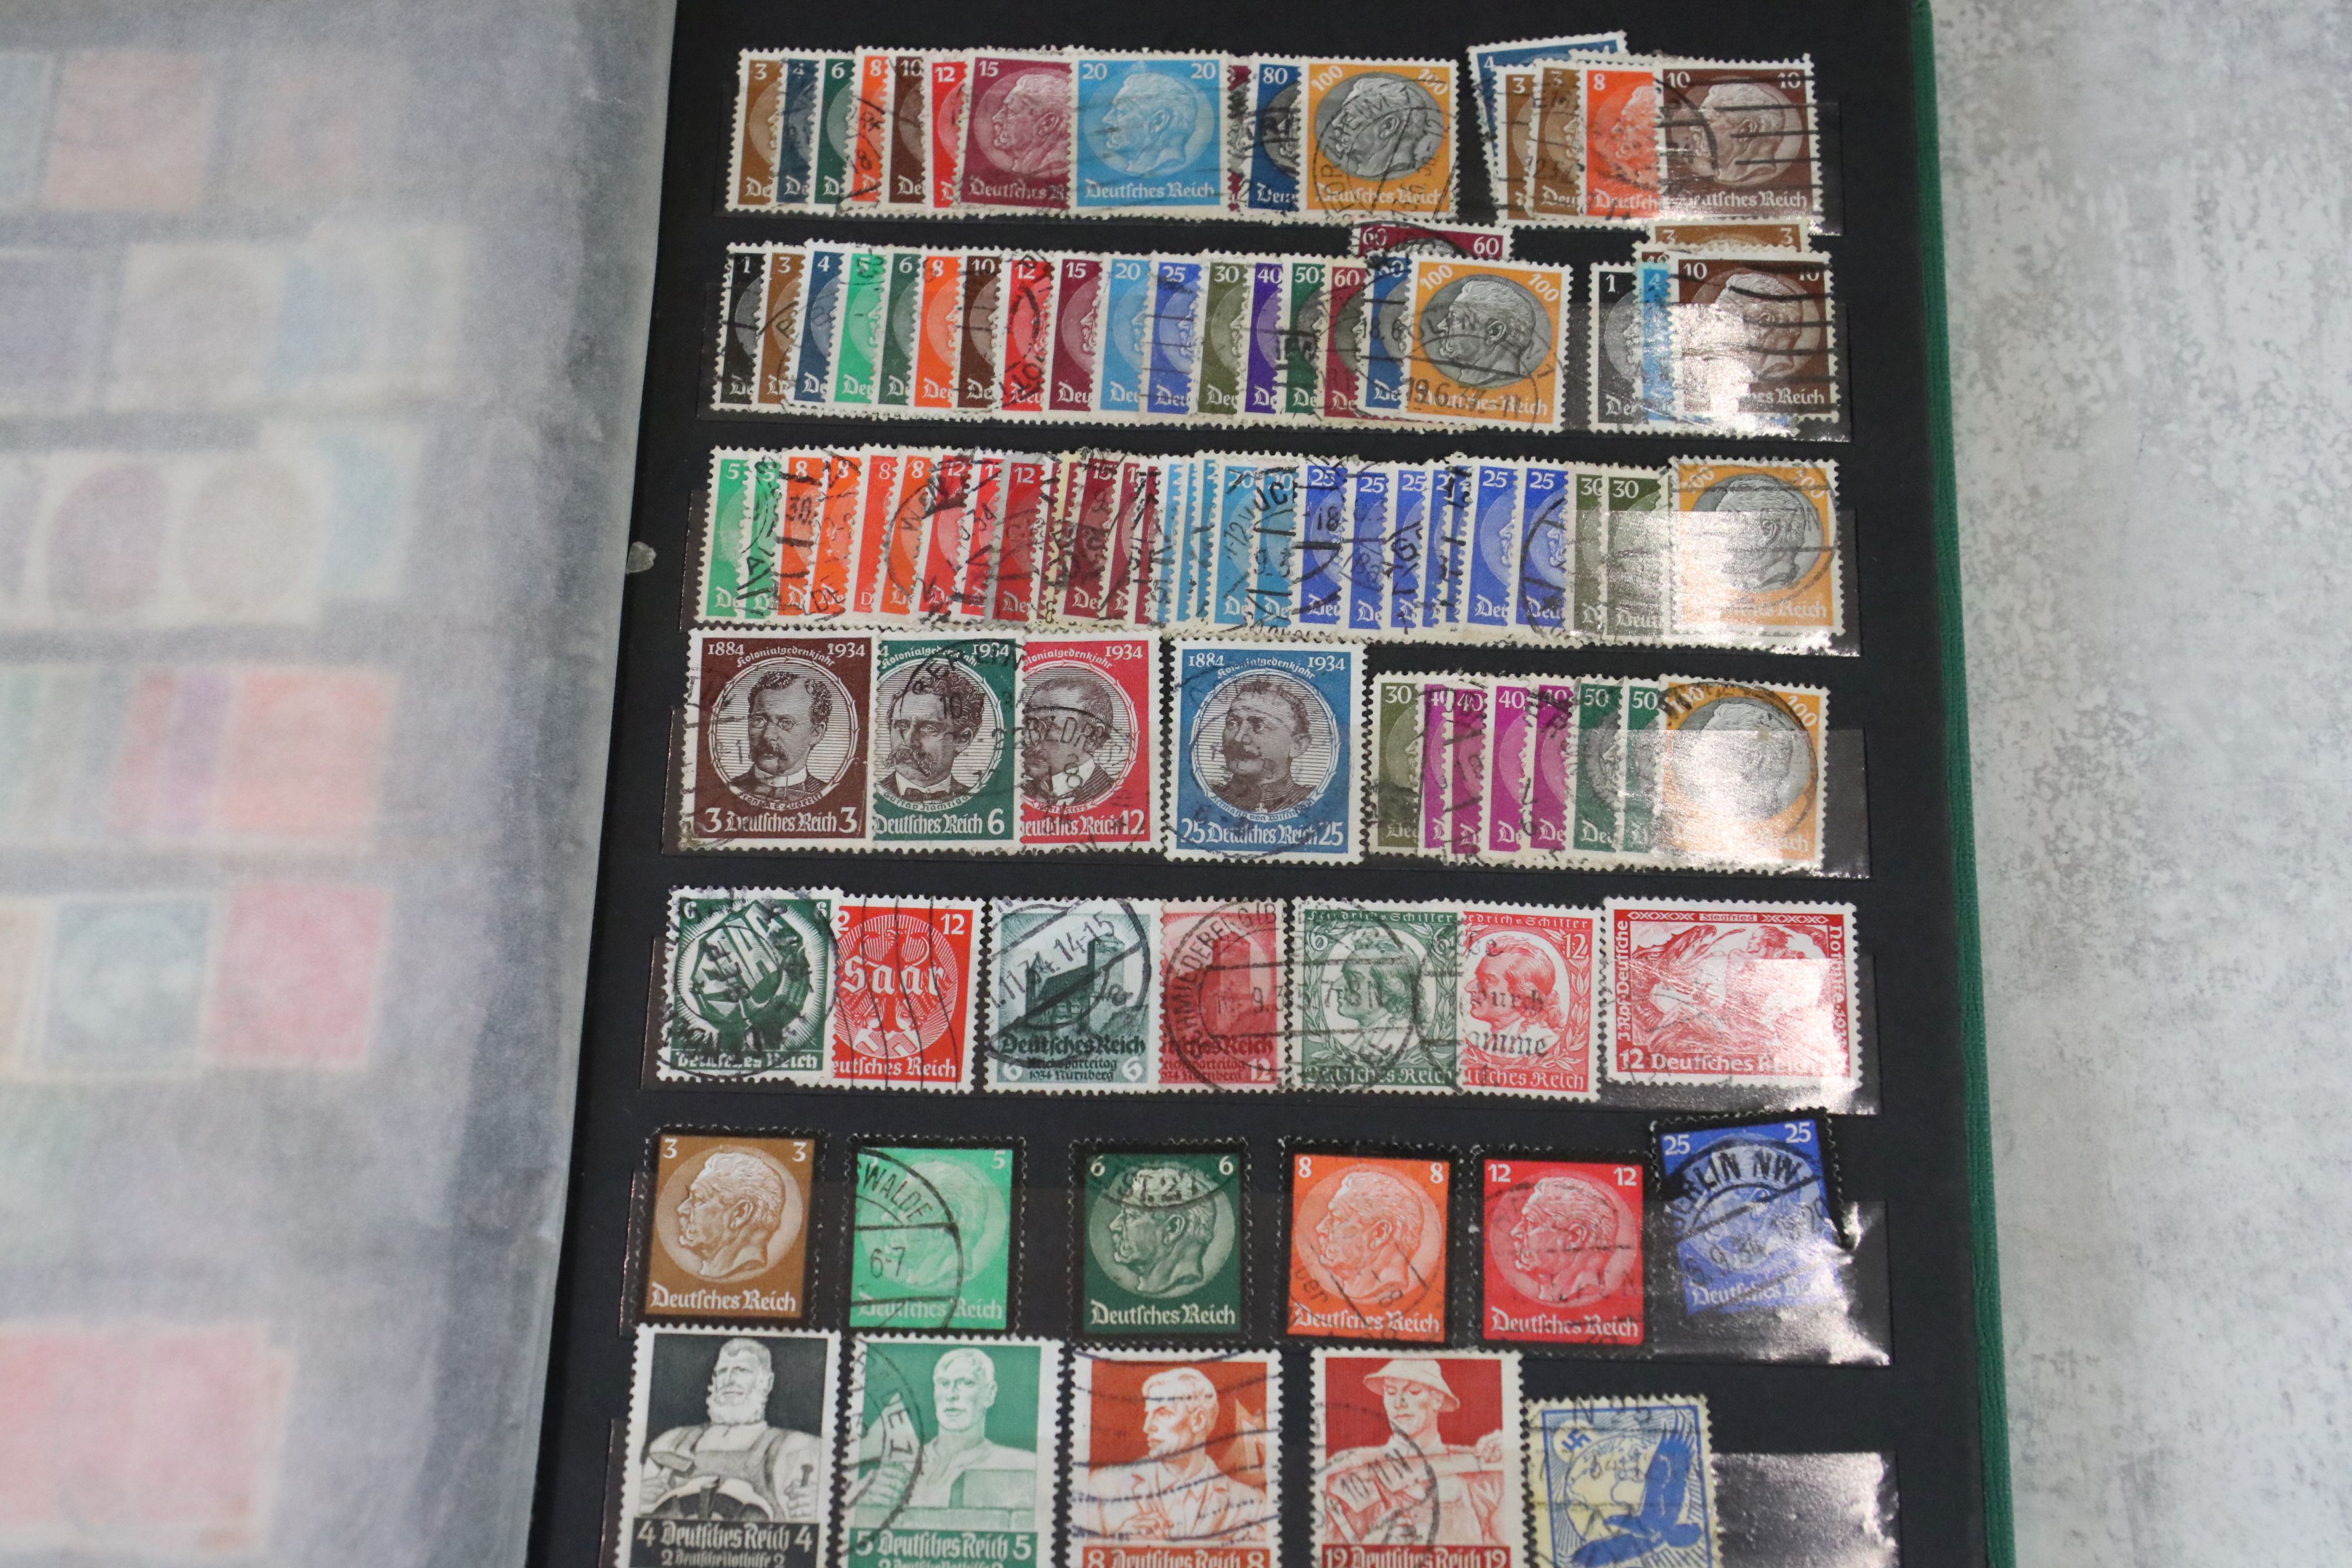 A Large Concise Collection Of World War One And World War Two German Stamps To Include Many Mint - Image 3 of 7